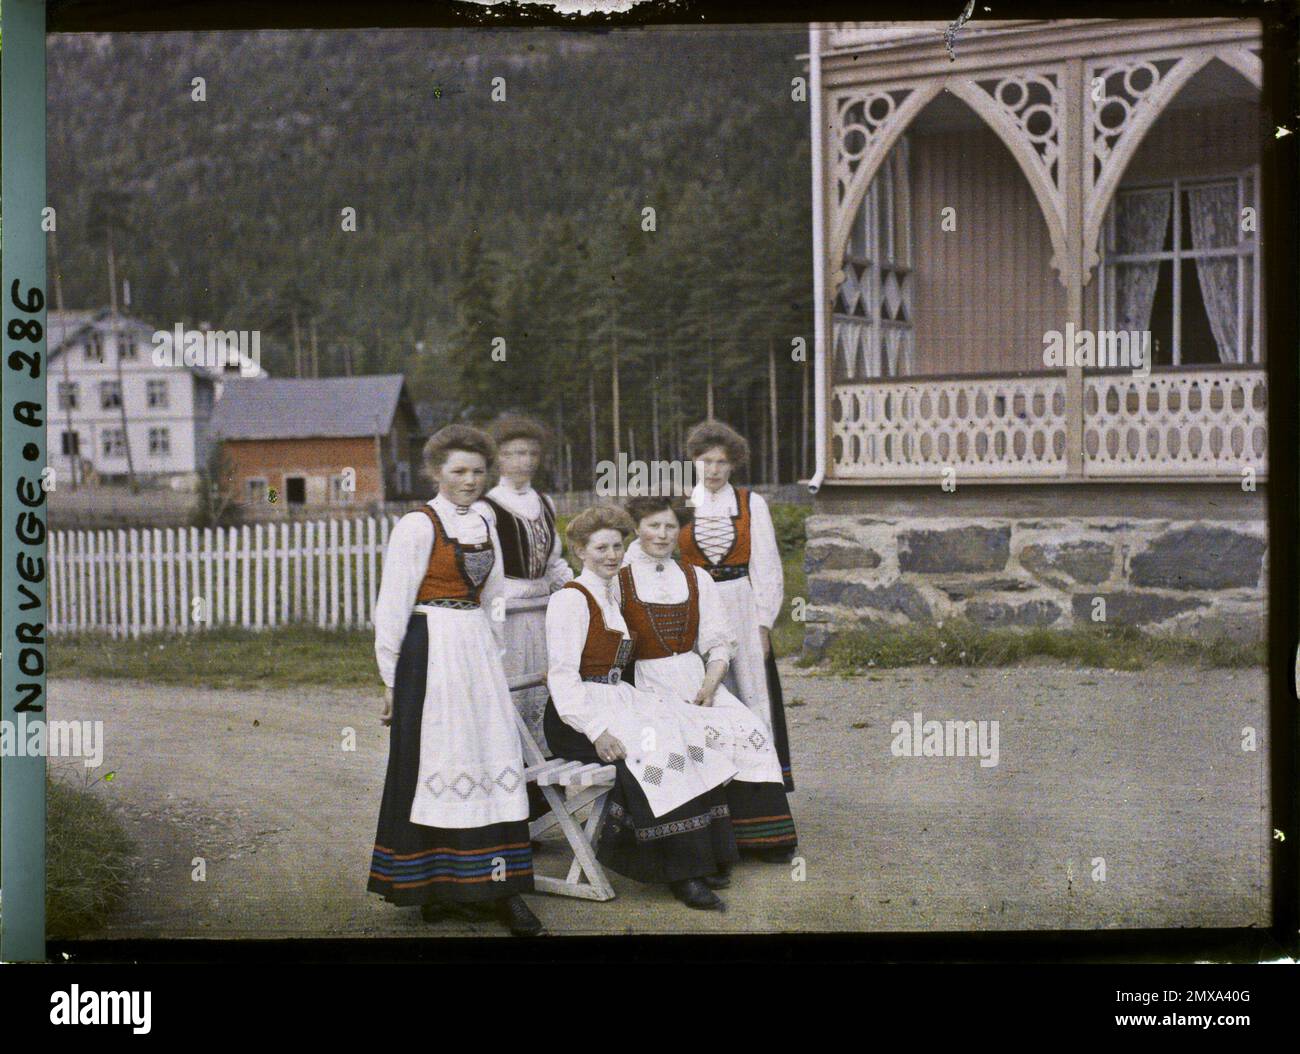 FAGERNES, NORDÈGE THE SERVICES OF THE HOTEL , 1910 - Voyage of Albert Kahn  and Auguste Léon in Scandinavia - (agosto 9 - septiembre 14) (francés -  Fagernes , Norvège Les domestiques